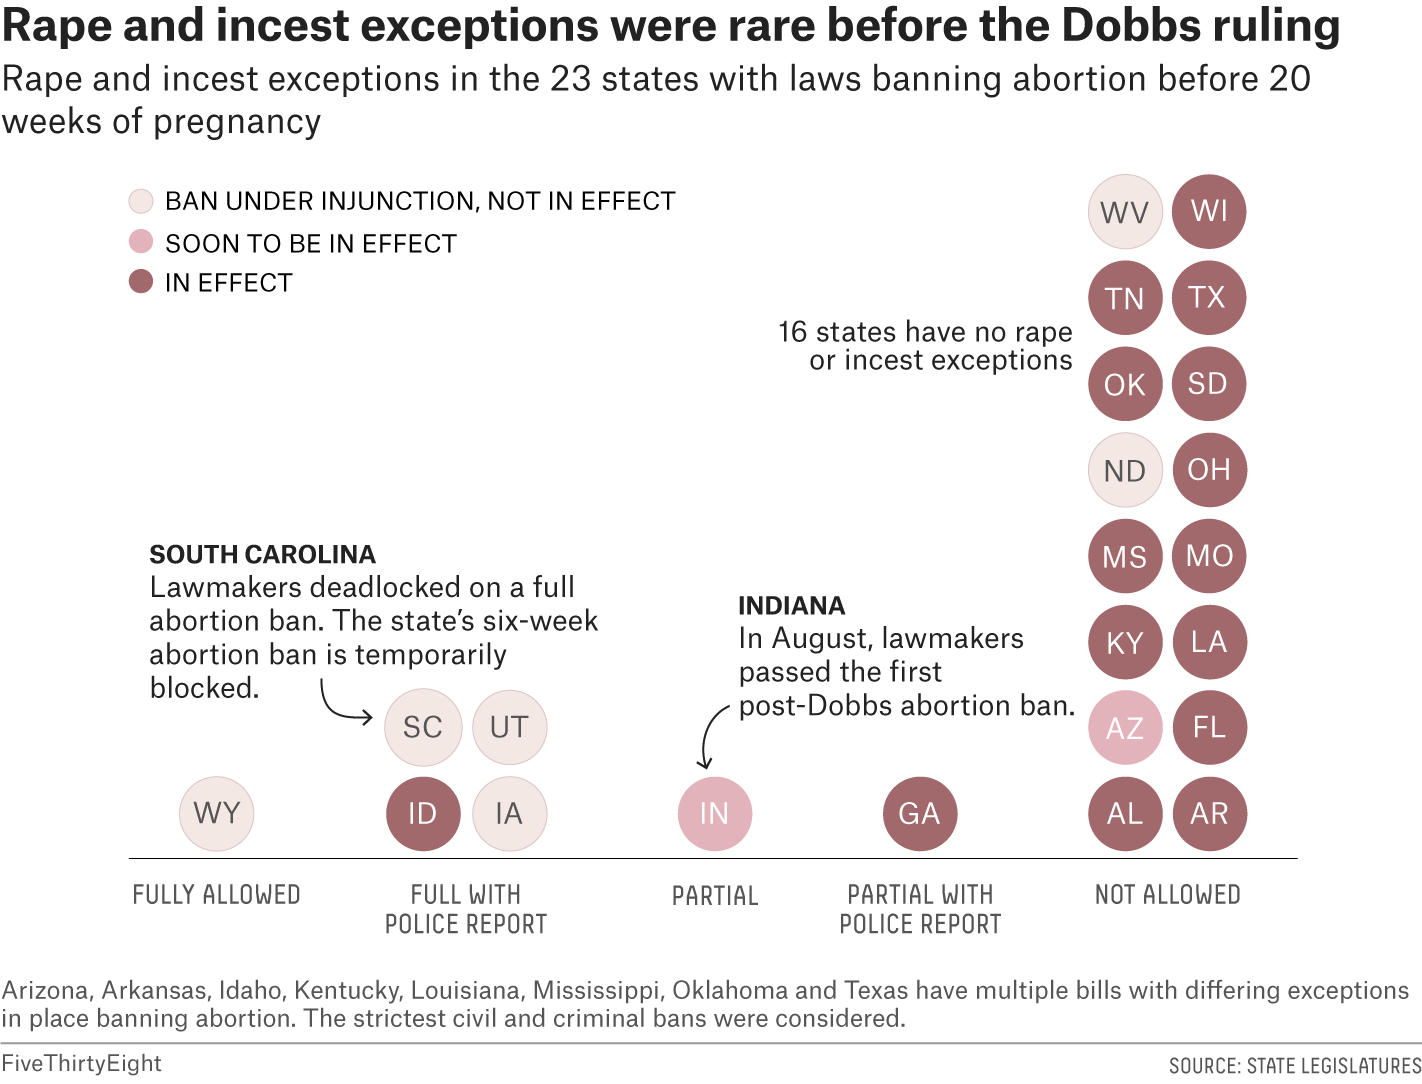 A chart shows which states have rape and incest exceptions in their abortion bans. Most states with bans (16) had no exceptions. 